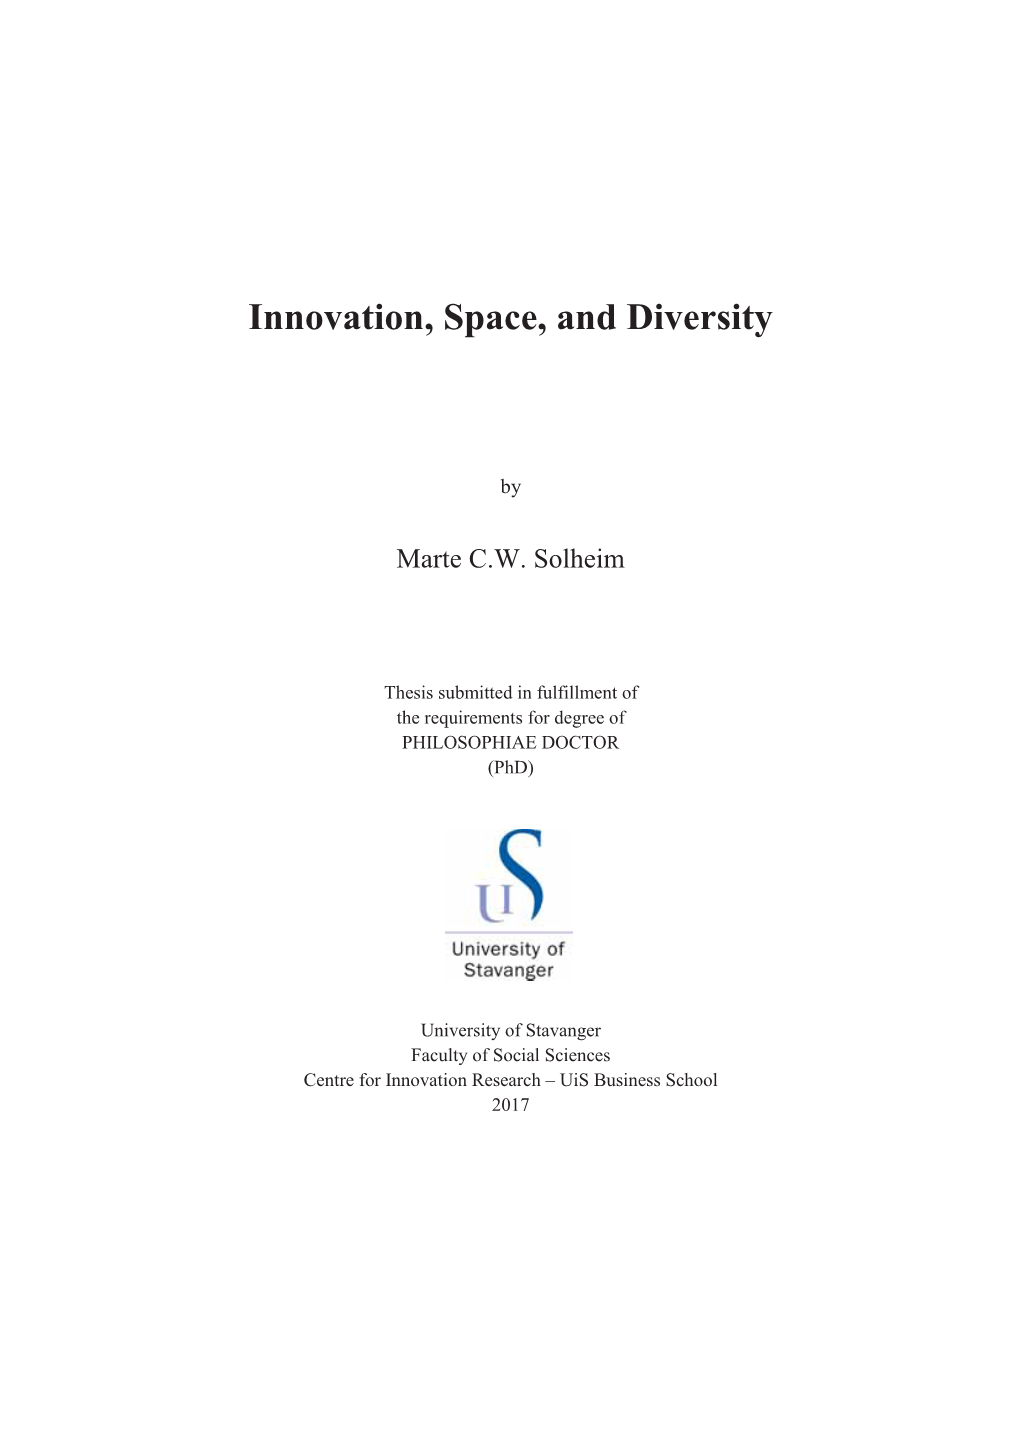 Innovation, Space, and Diversity